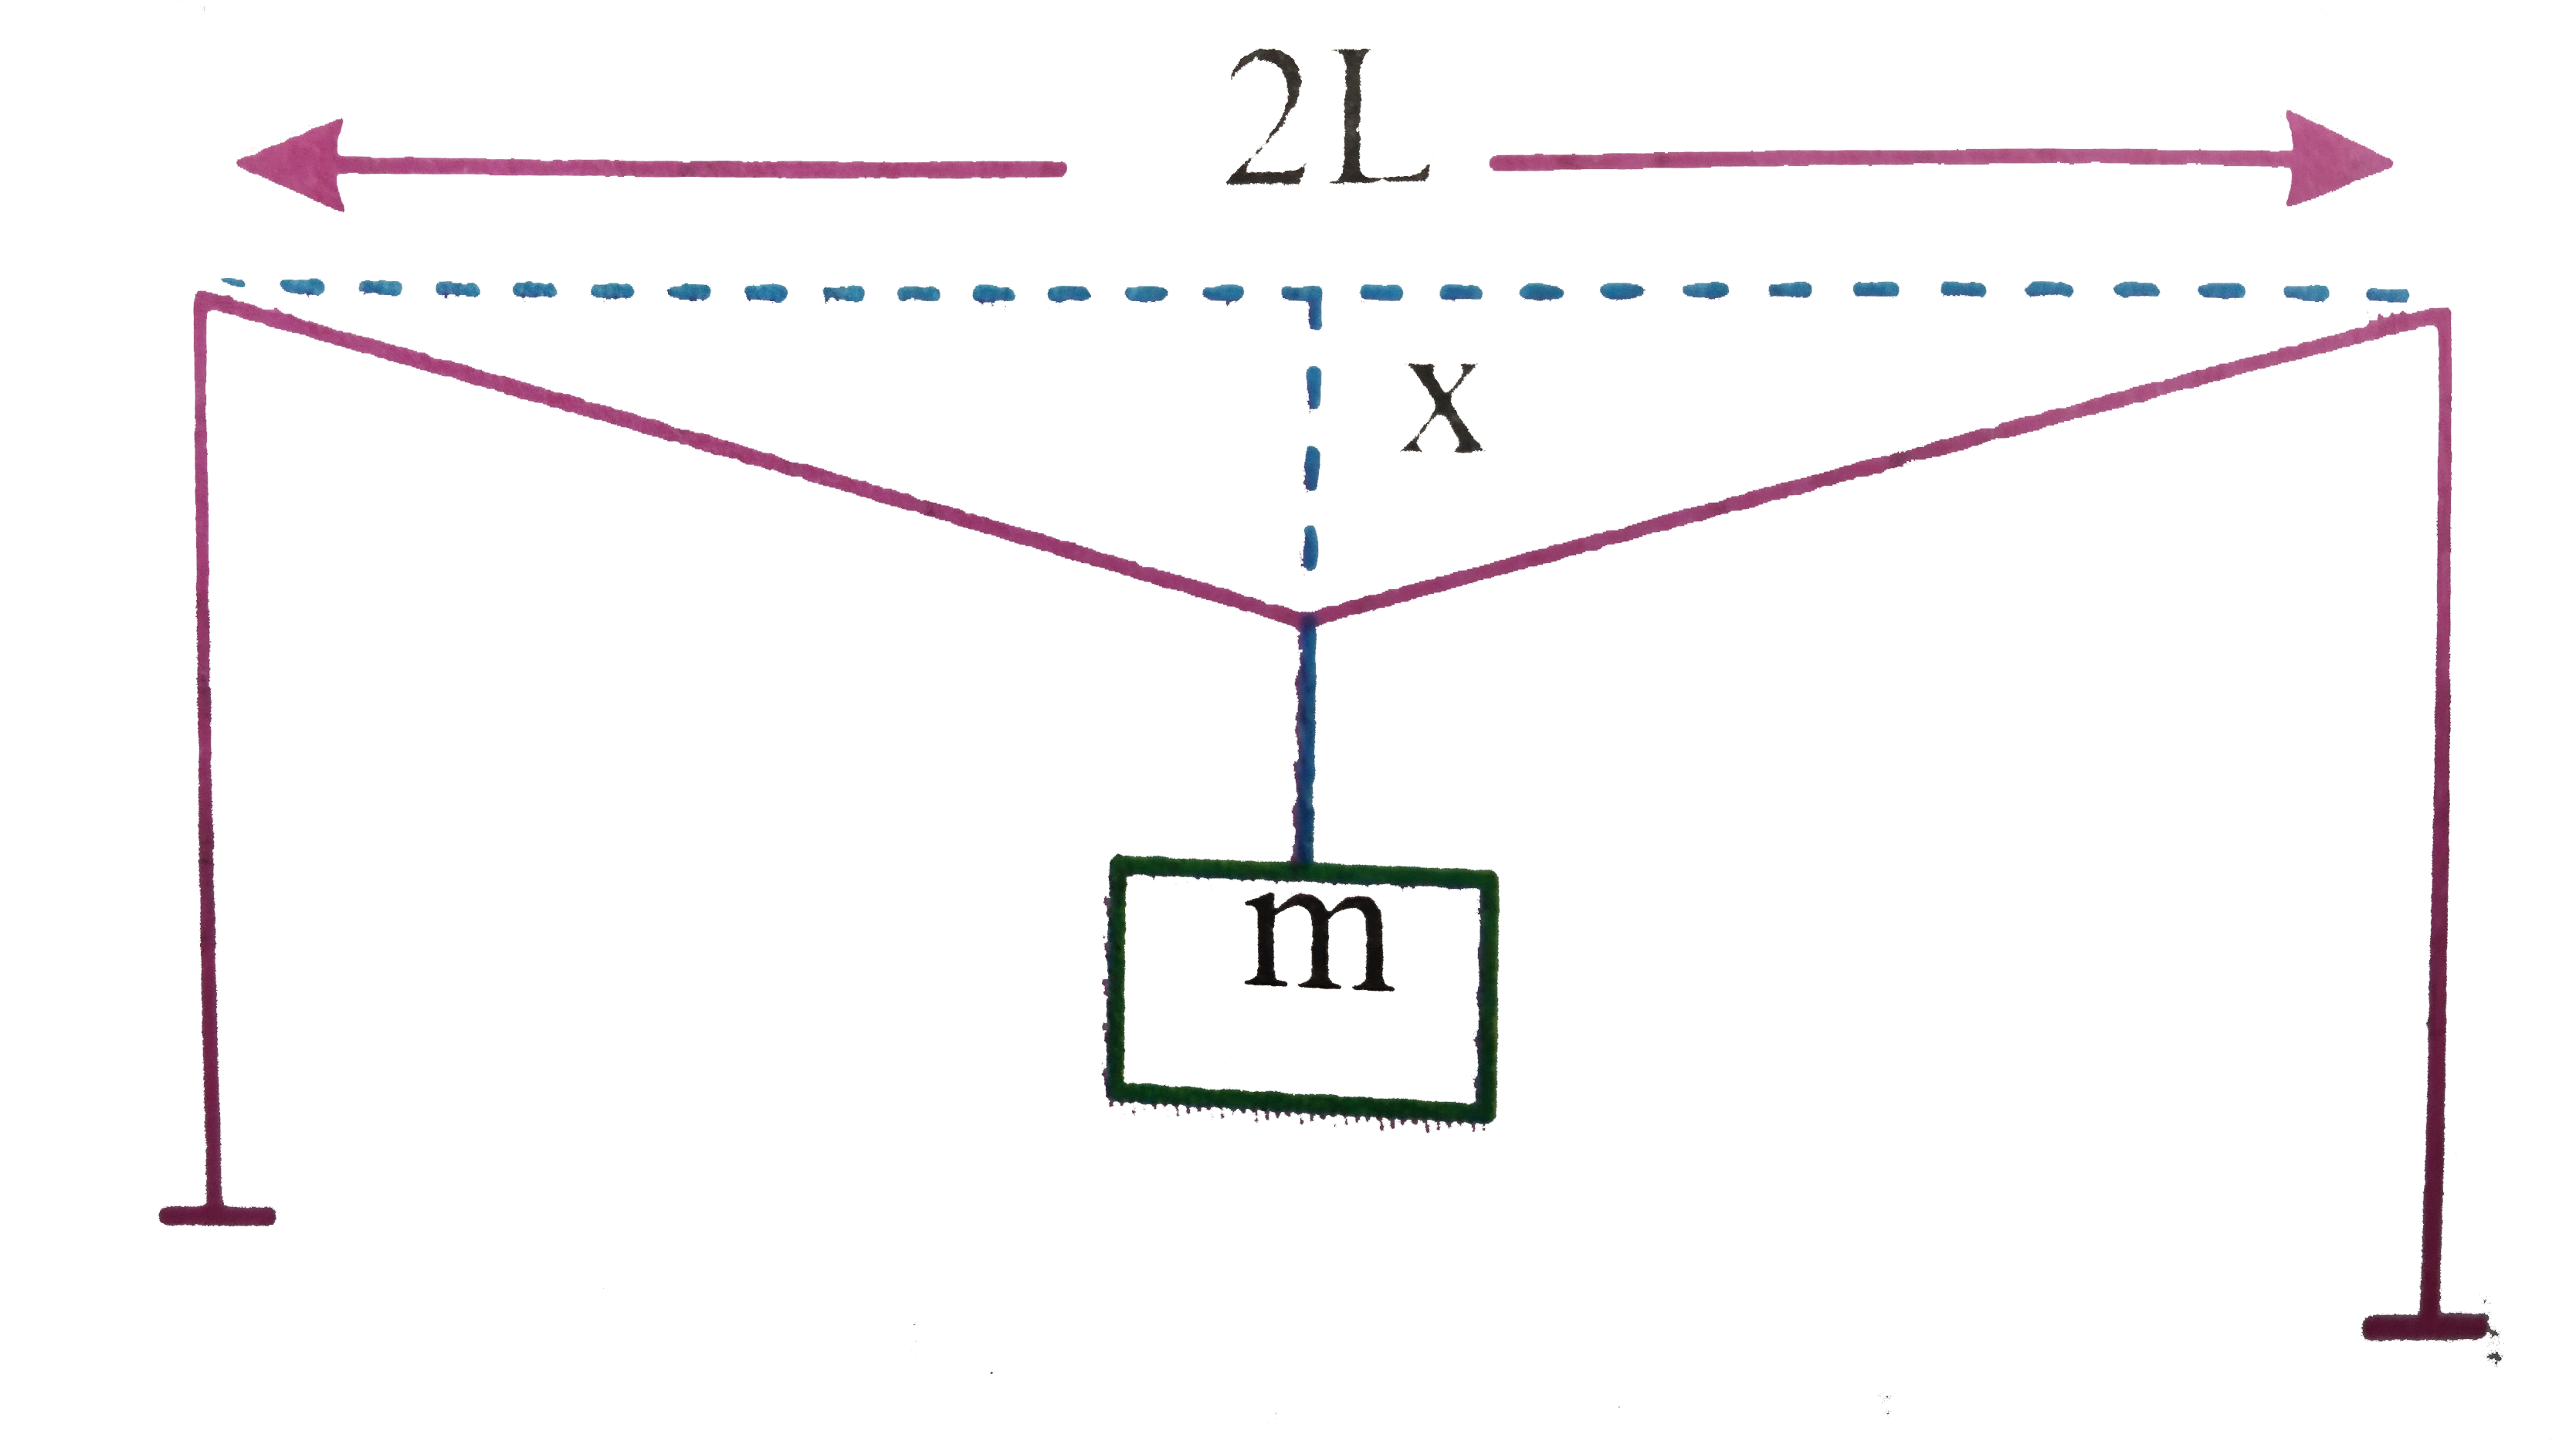 A mild steel wire of length 2L is strethched, within its elastic limit horizontally between  two pillars(figure). A mass of m is suspended form the midpont  of the wire. Strain in the wire is